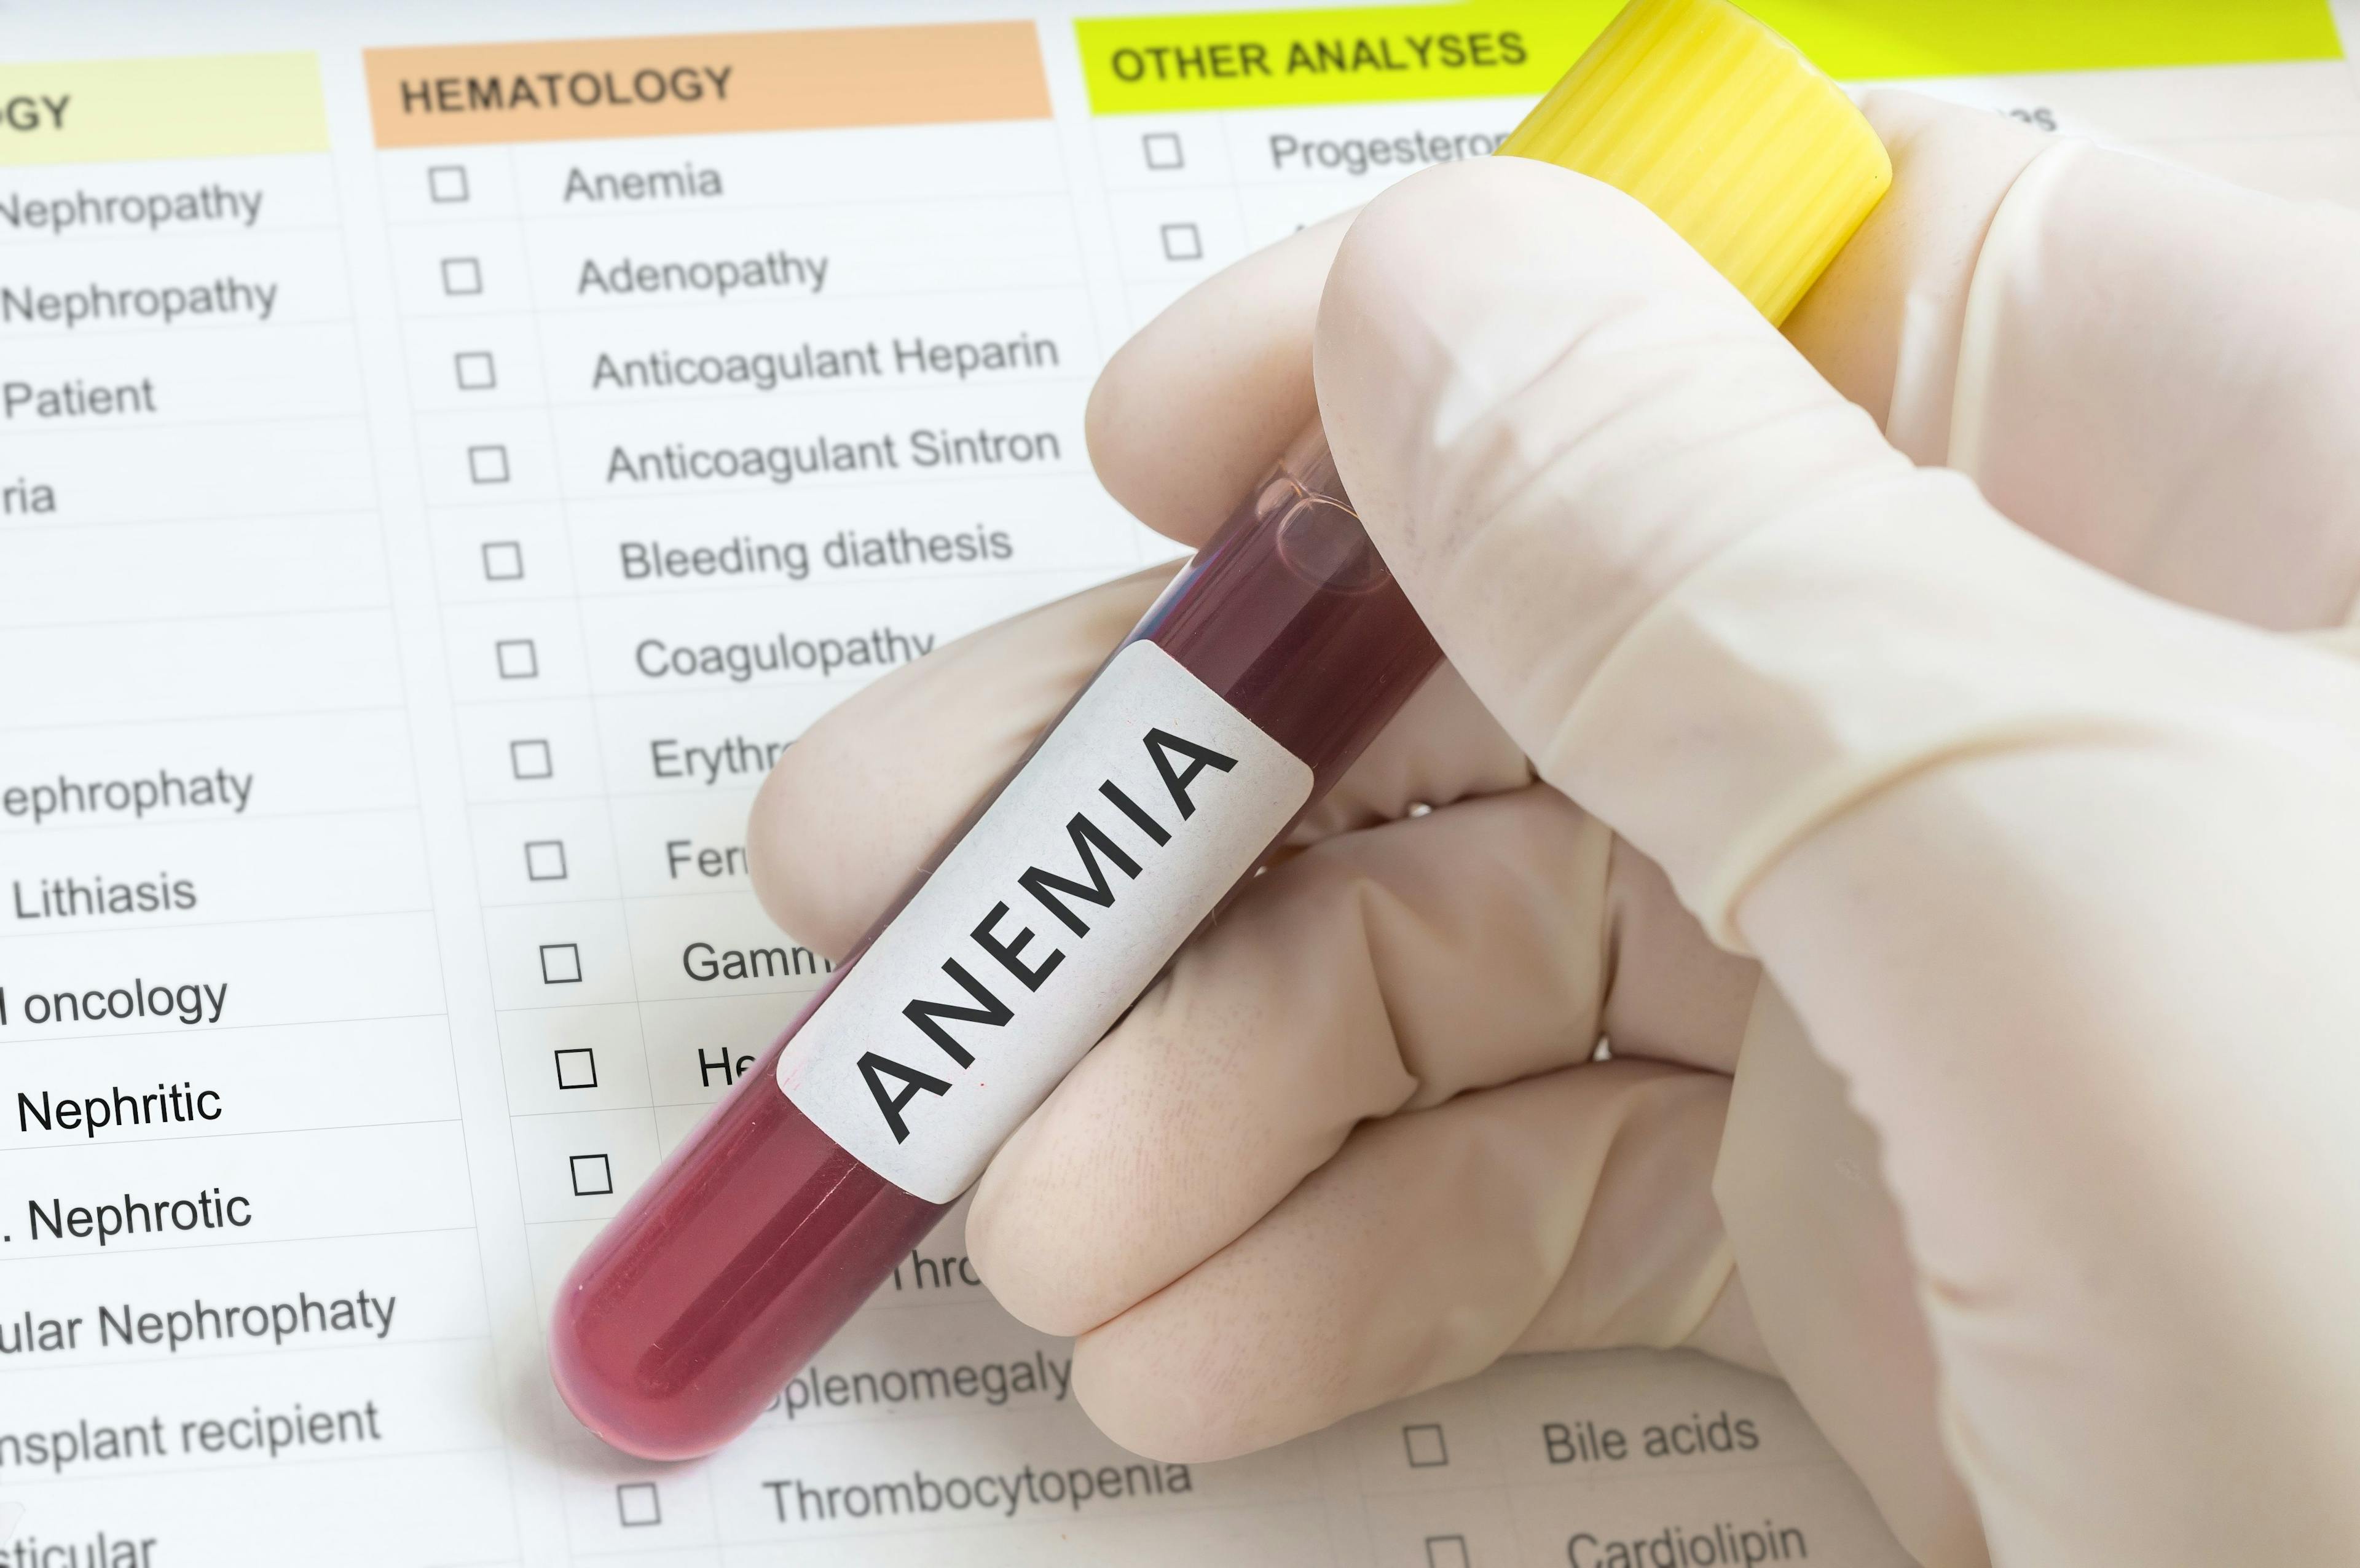 Anemia is both common and independently associated with poor clinical outcomes in respiratory infections, including COVID-19.